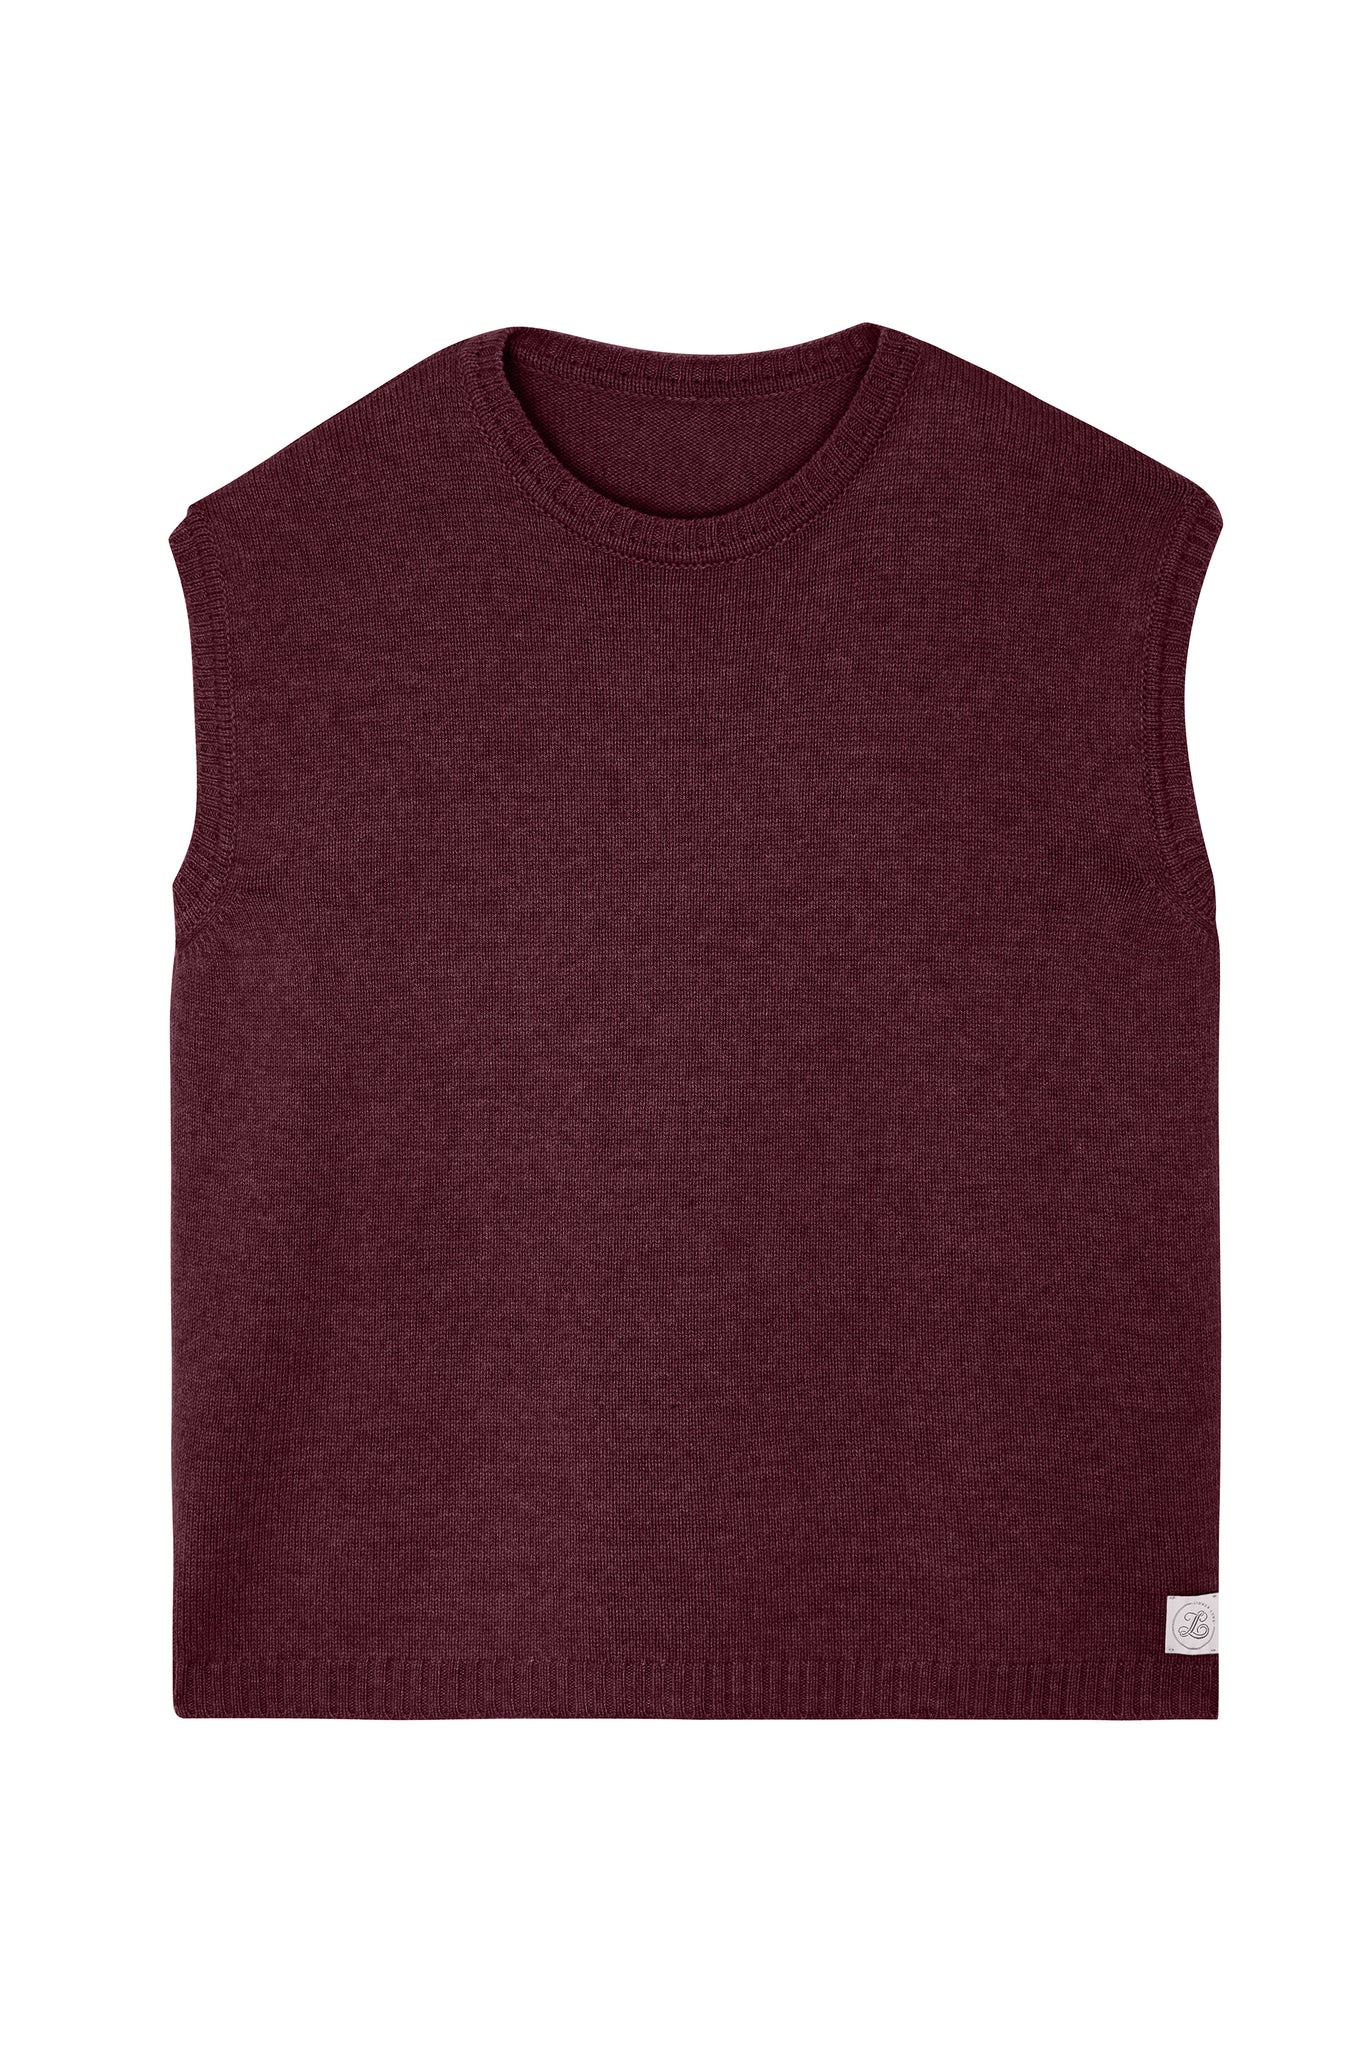 Wine red/ Bordeaux sleeveless cashmere sweater for layering